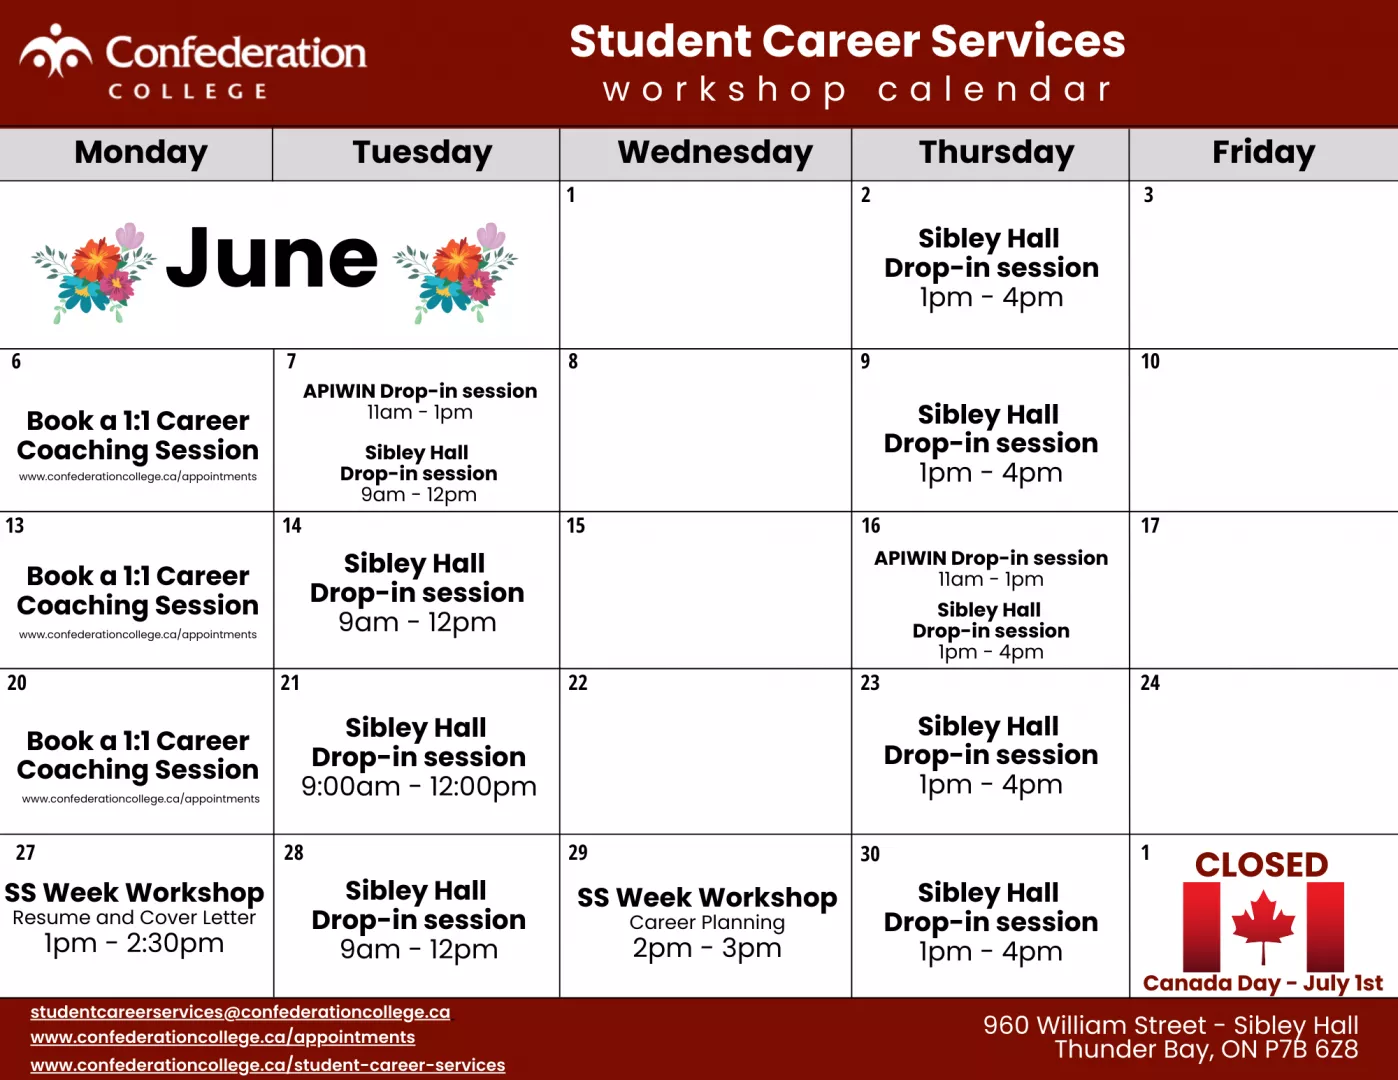 Calendar of events for Student Career Services